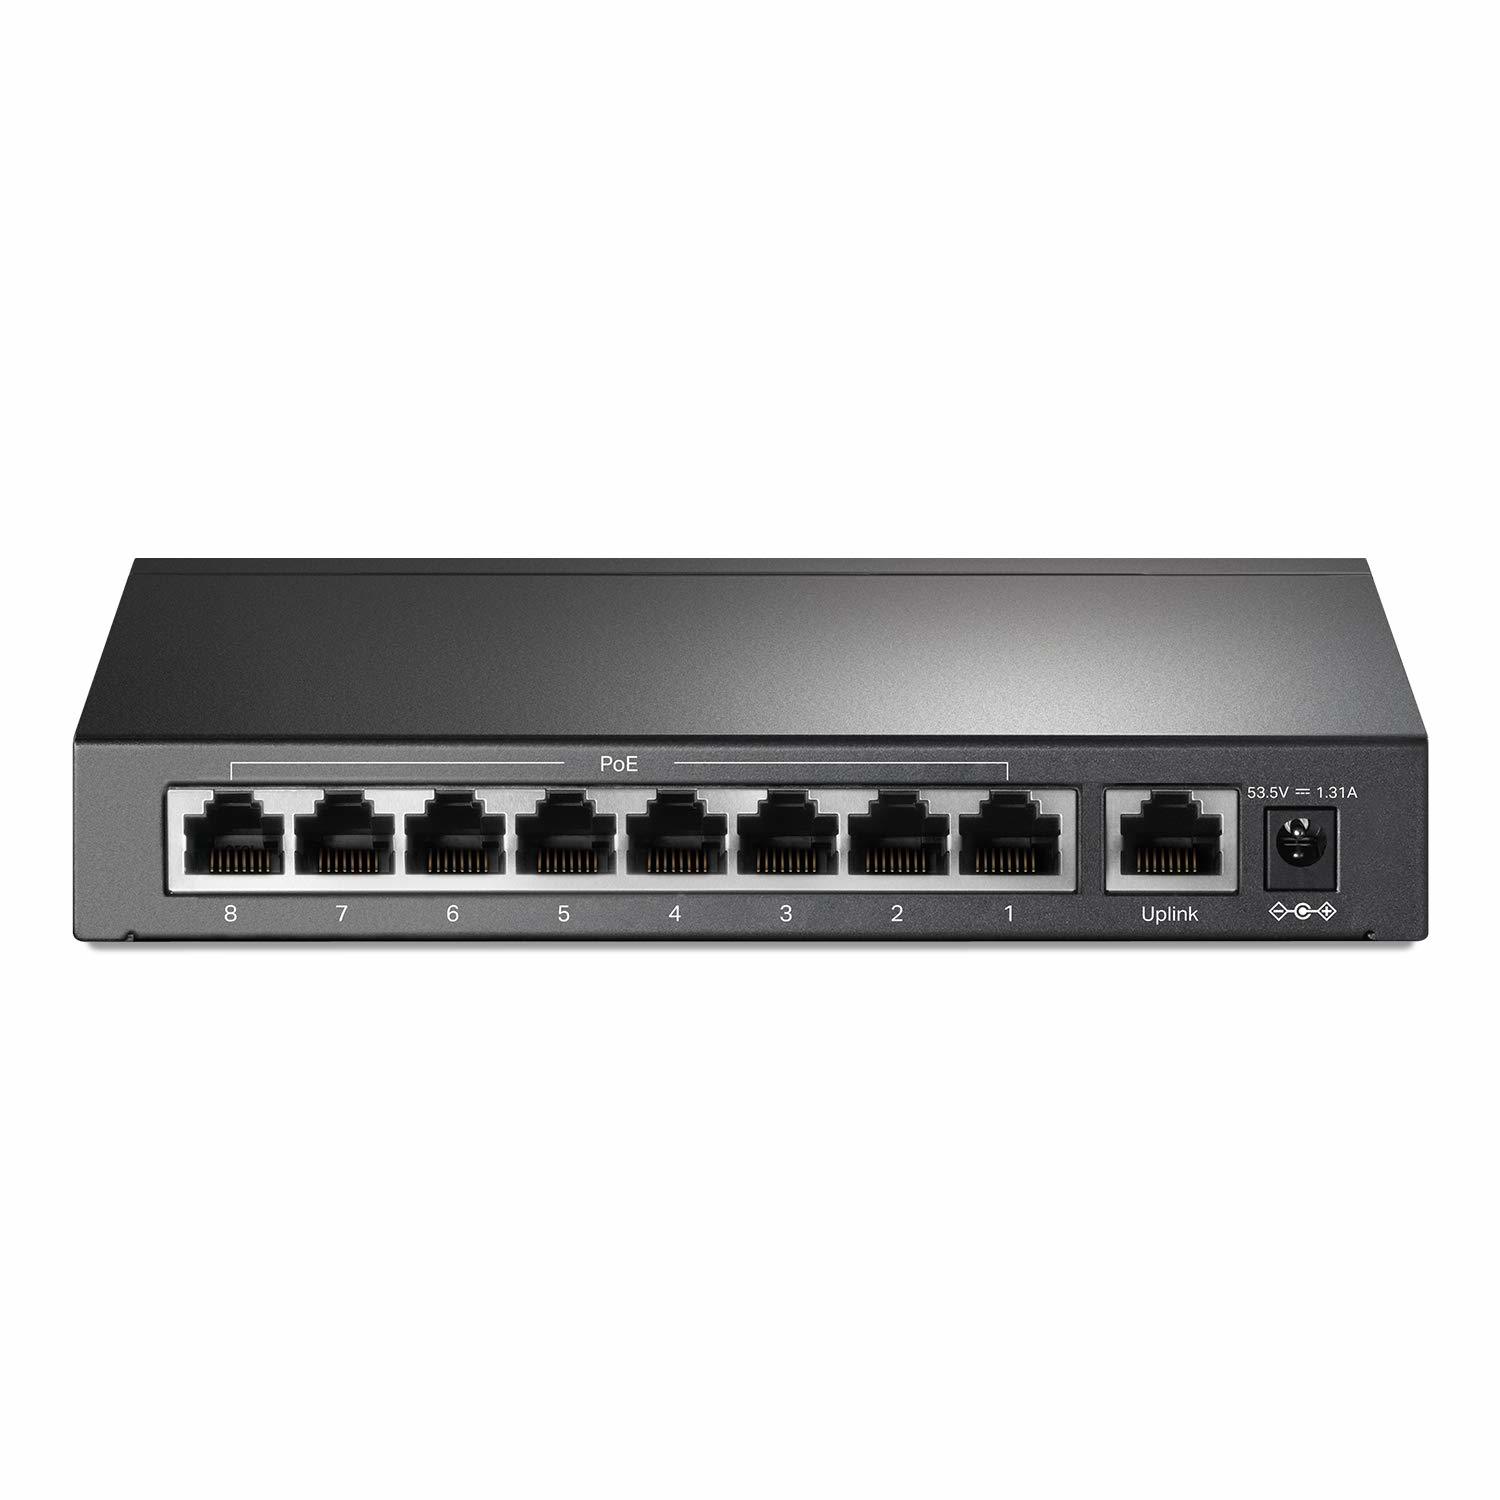 Primary image for TP-Link 9 Port Fast Ethernet 10/100Mbps PoE Switch | 8 PoE+ Ports @65W | Sturdy 